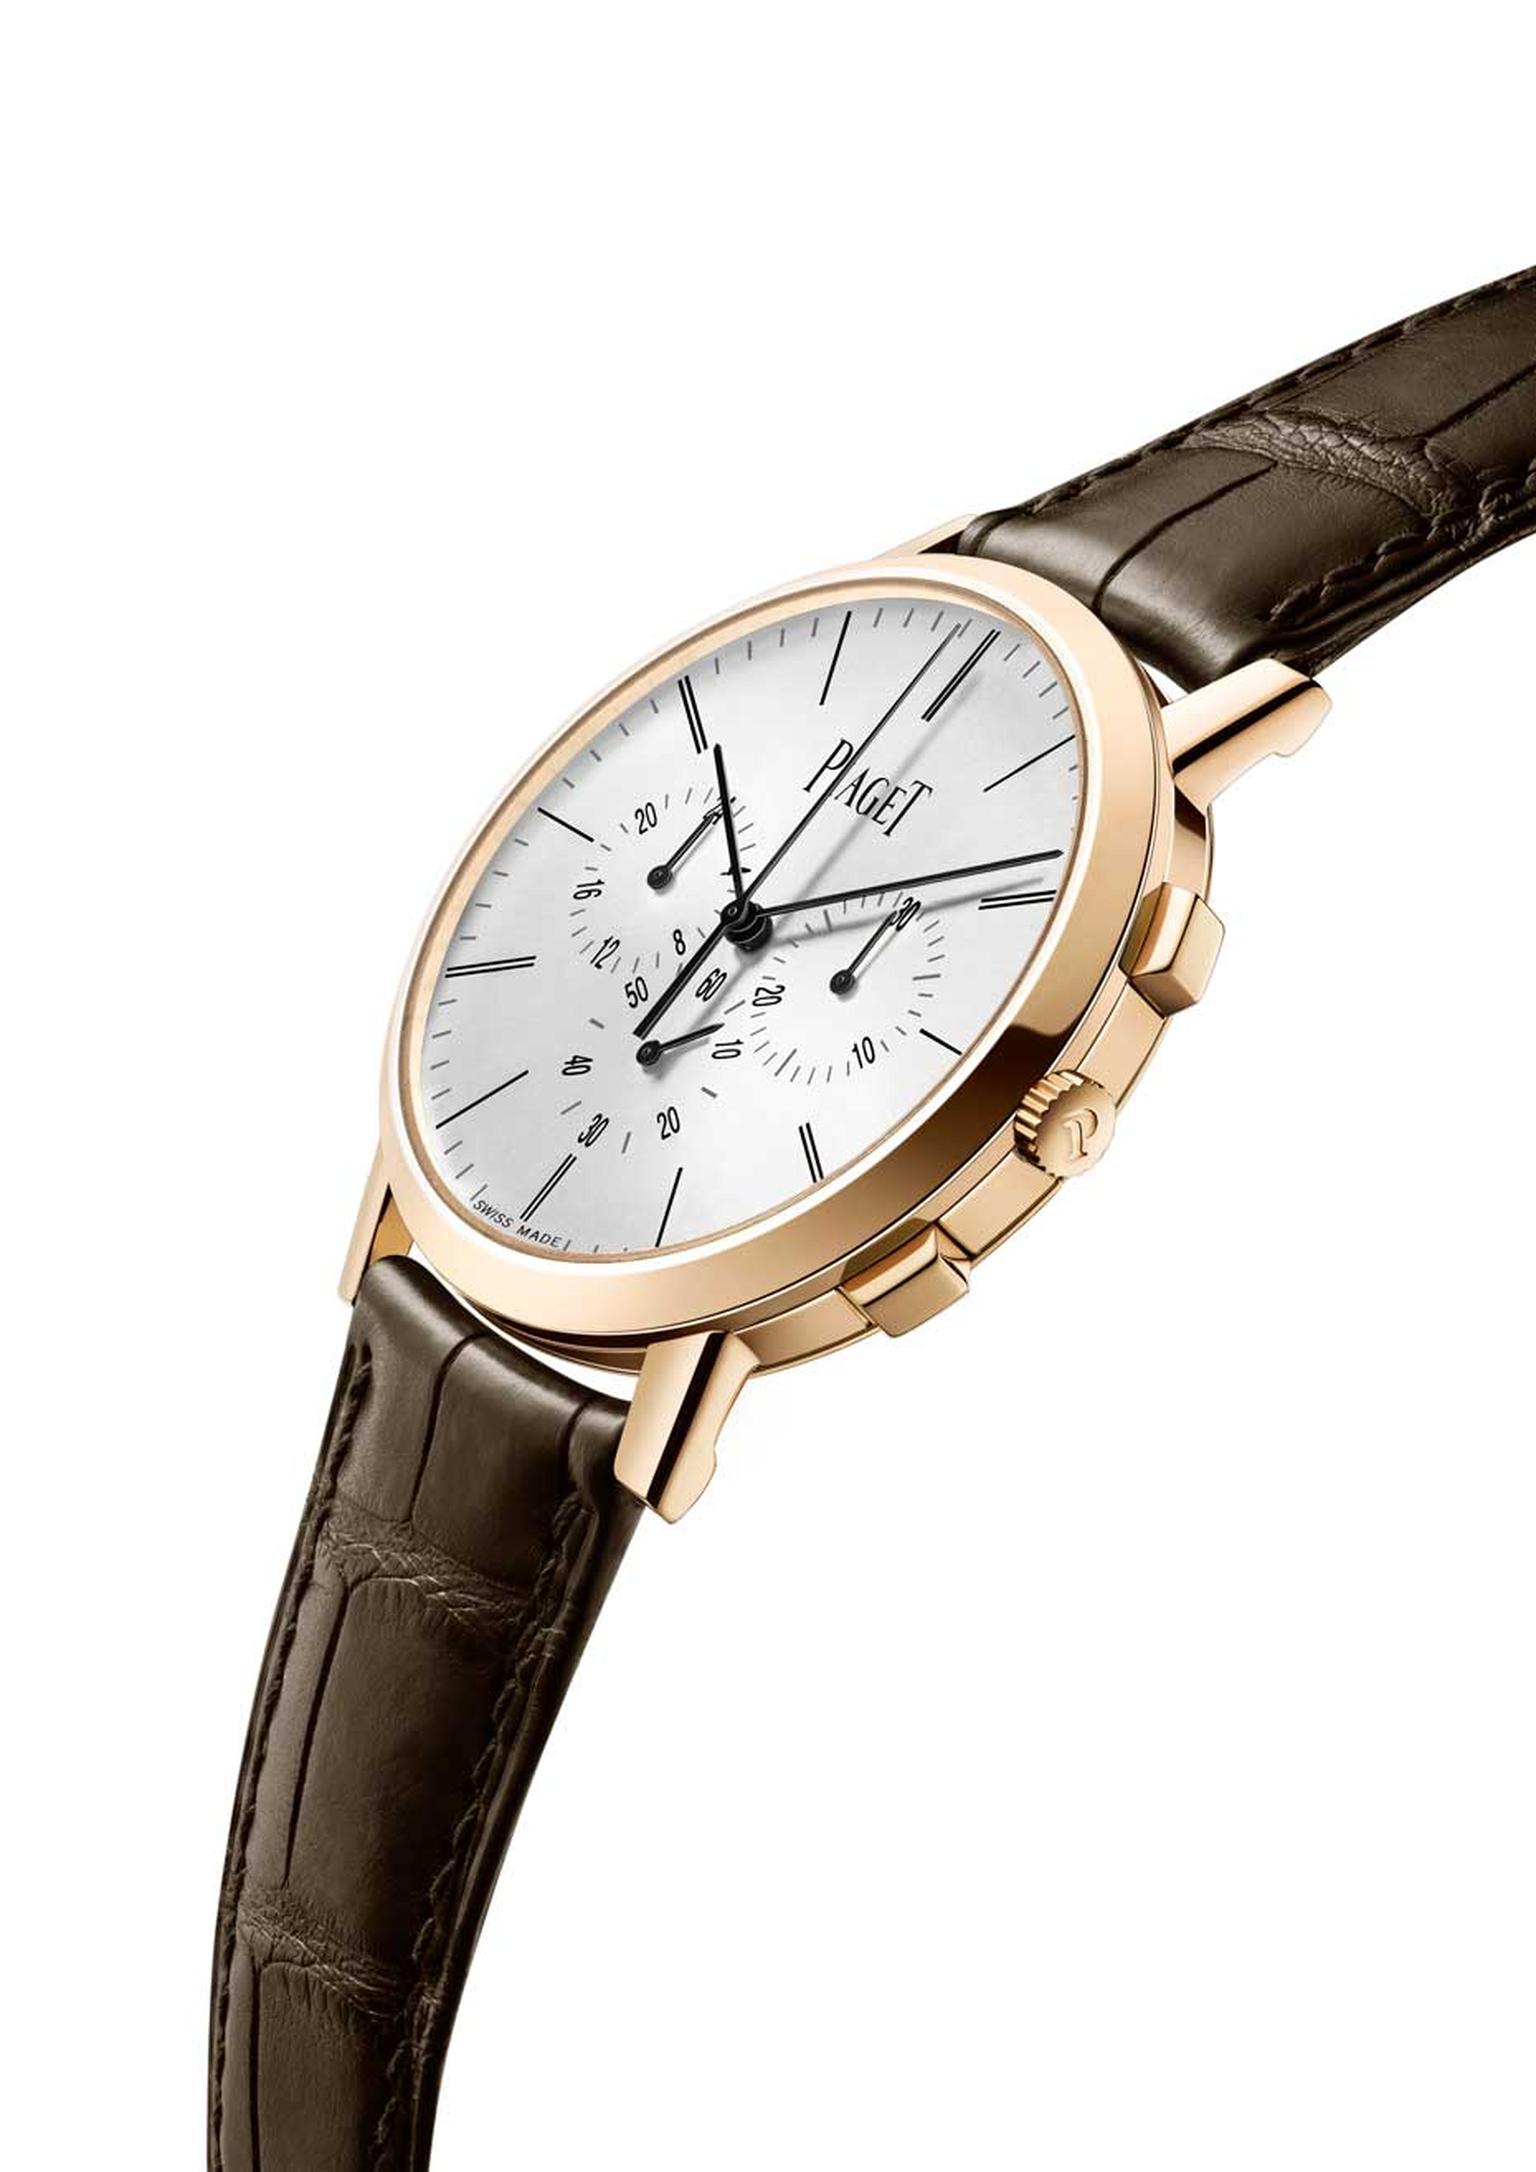 Piaget has gained a reputation for its record-breaking, ultra-thin movements and elegant watches since 1956. This year the Piaget Altiplano Chronograph has just smashed two new records as the world's thinnest hand-wound flyback chronograph movement - at j